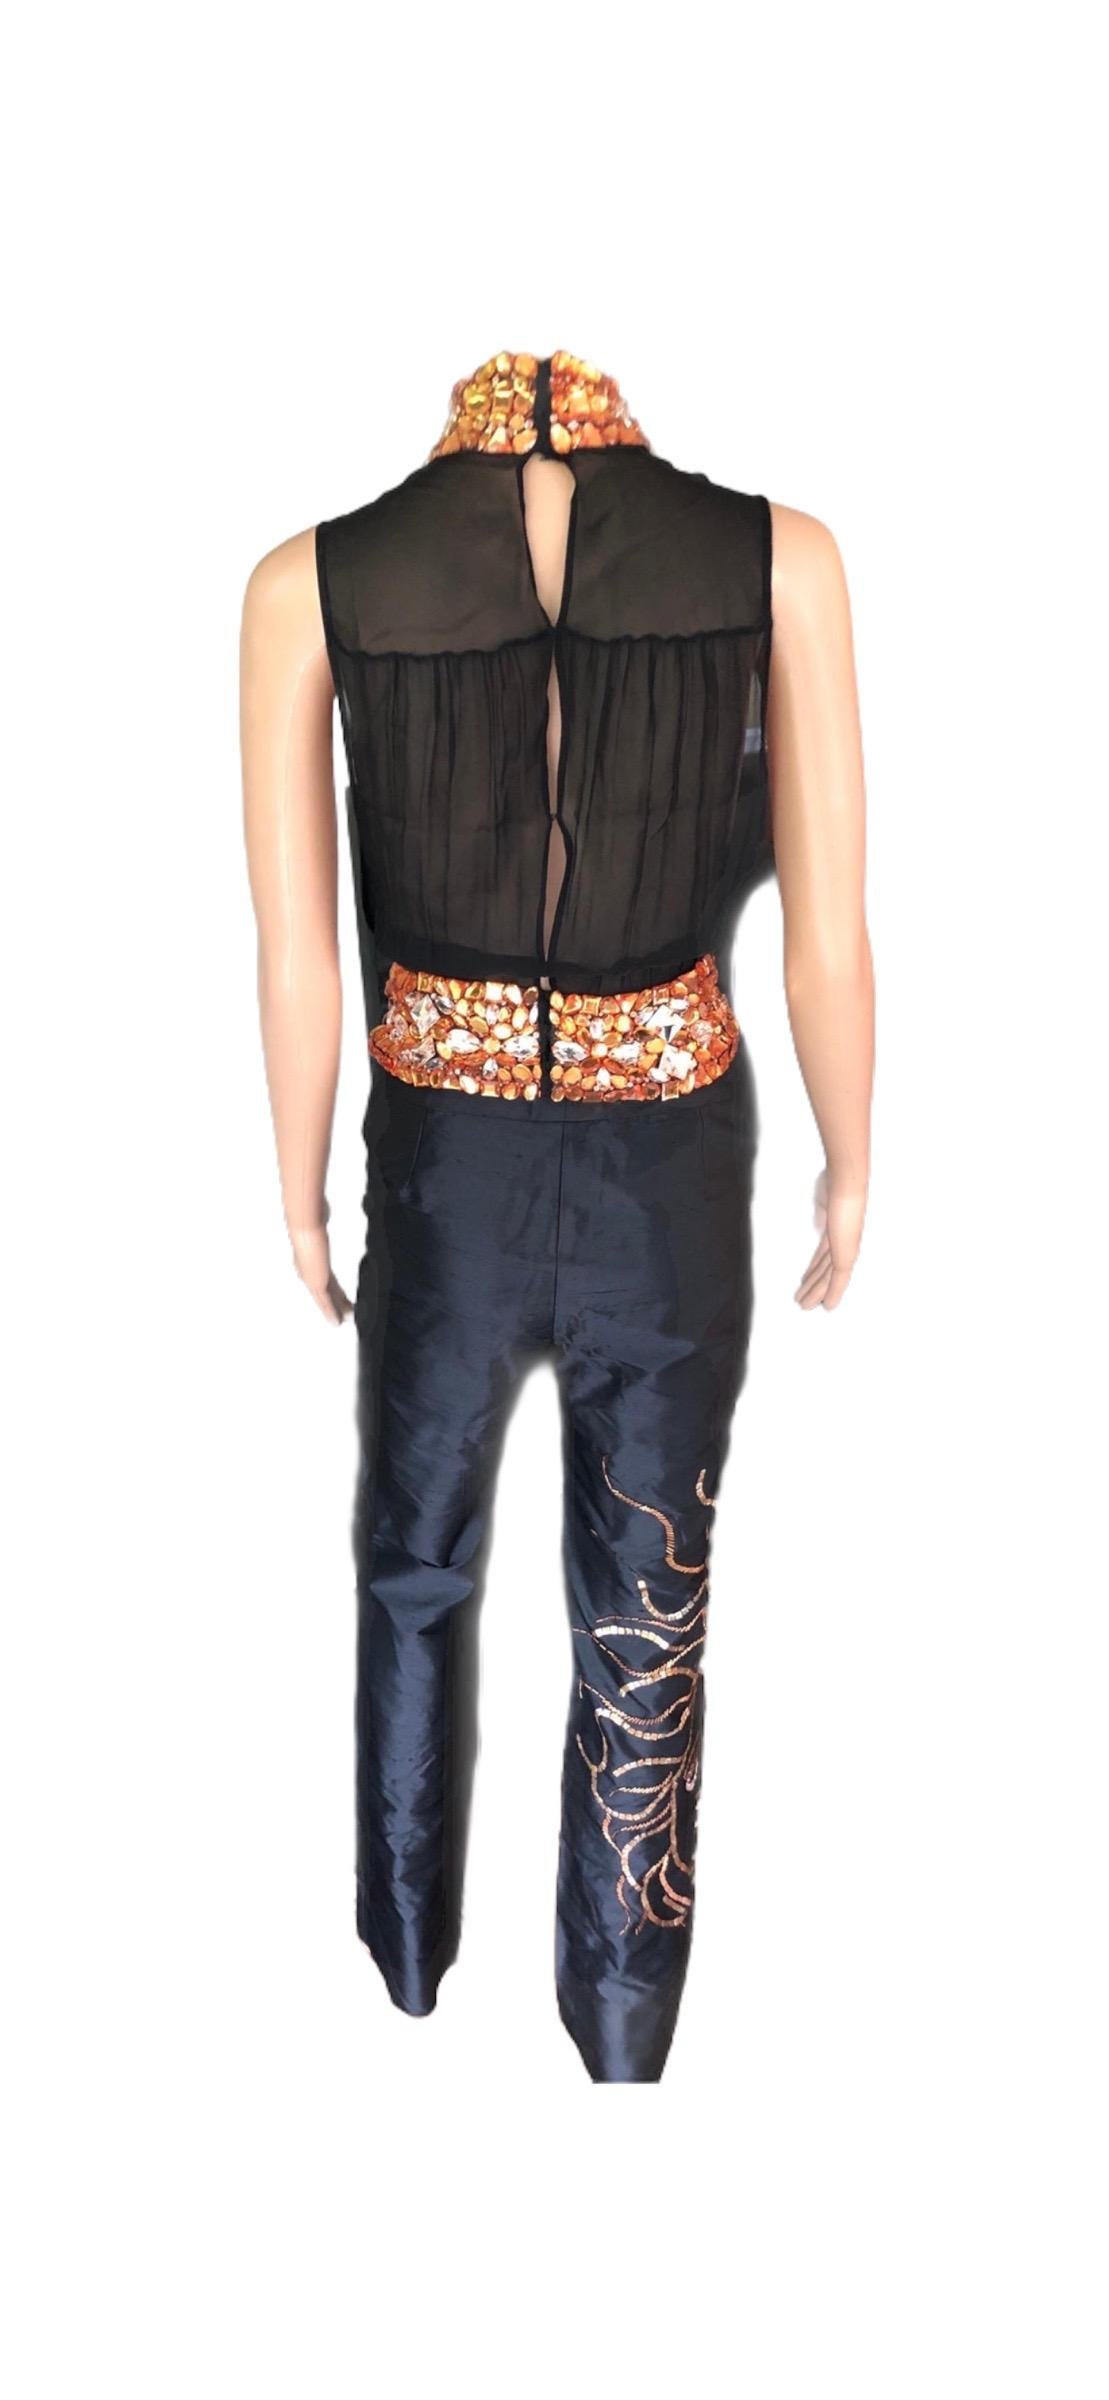 Gianni Versace Couture S/S 2000 Runway Embellished Sheer Top & Pants 2 Piece Set For Sale 12